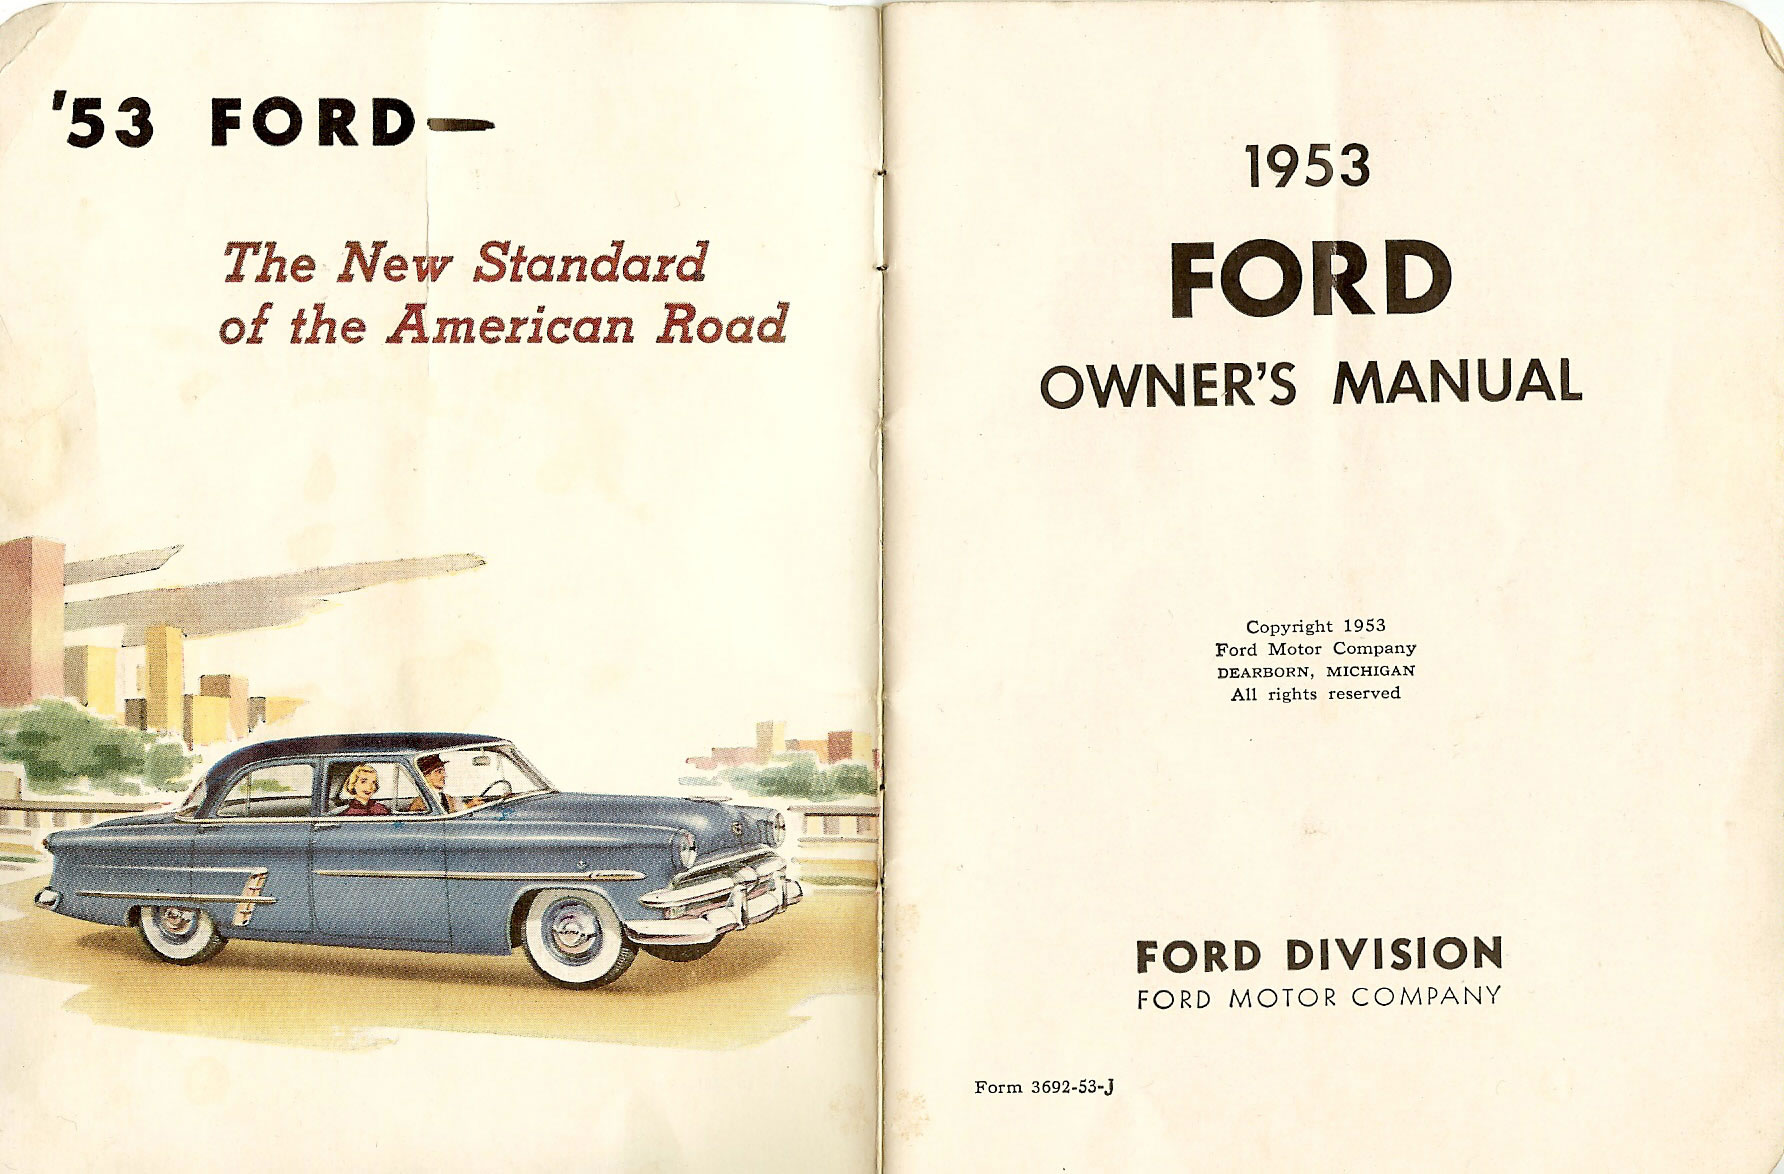 1953_Ford_Owners_Manual-01a_amp_01b